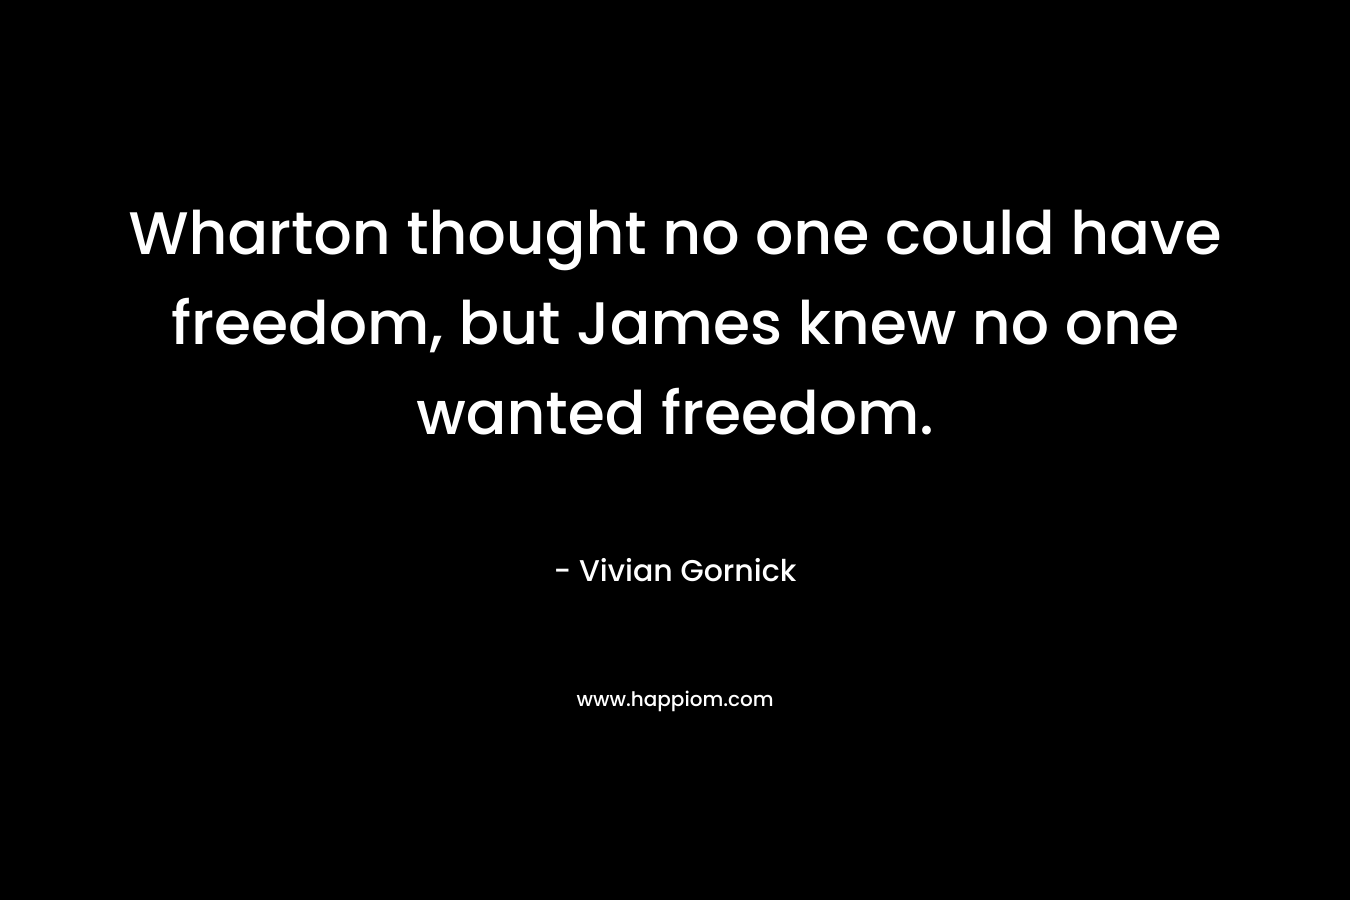 Wharton thought no one could have freedom, but James knew no one wanted freedom. – Vivian Gornick